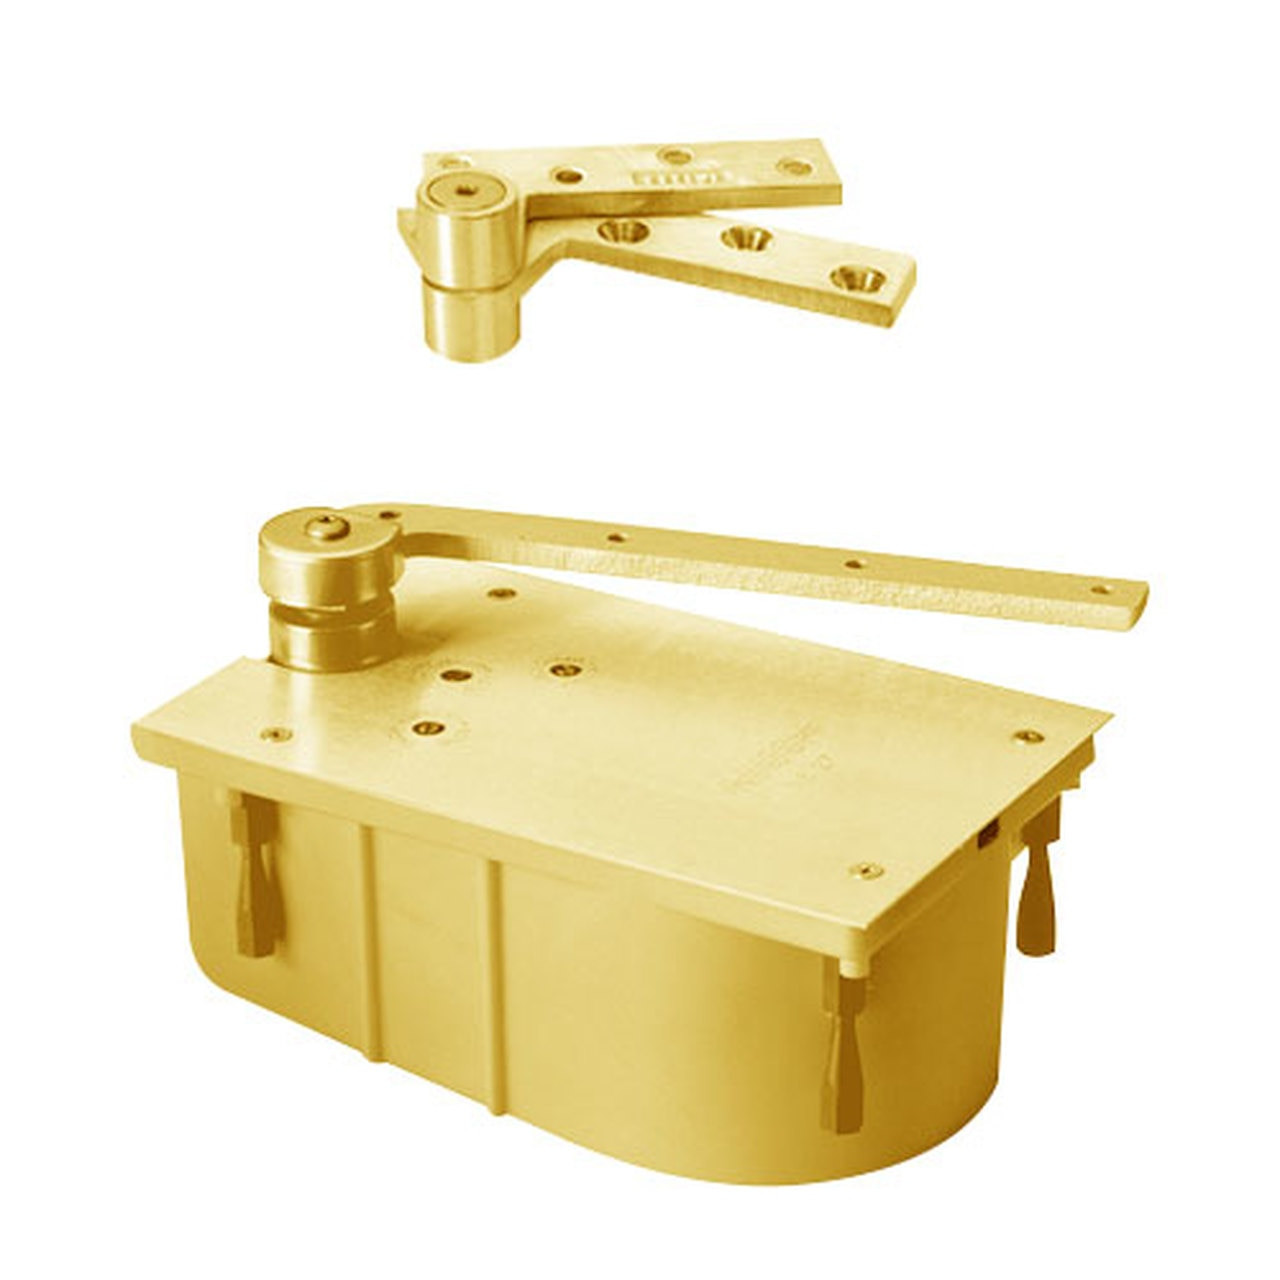 F127-105N-CWF-LH-605 Rixson 27 Series Fire Rated Heavy Duty 3/4" Offset Hung Floor Closer in Bright Brass Finish